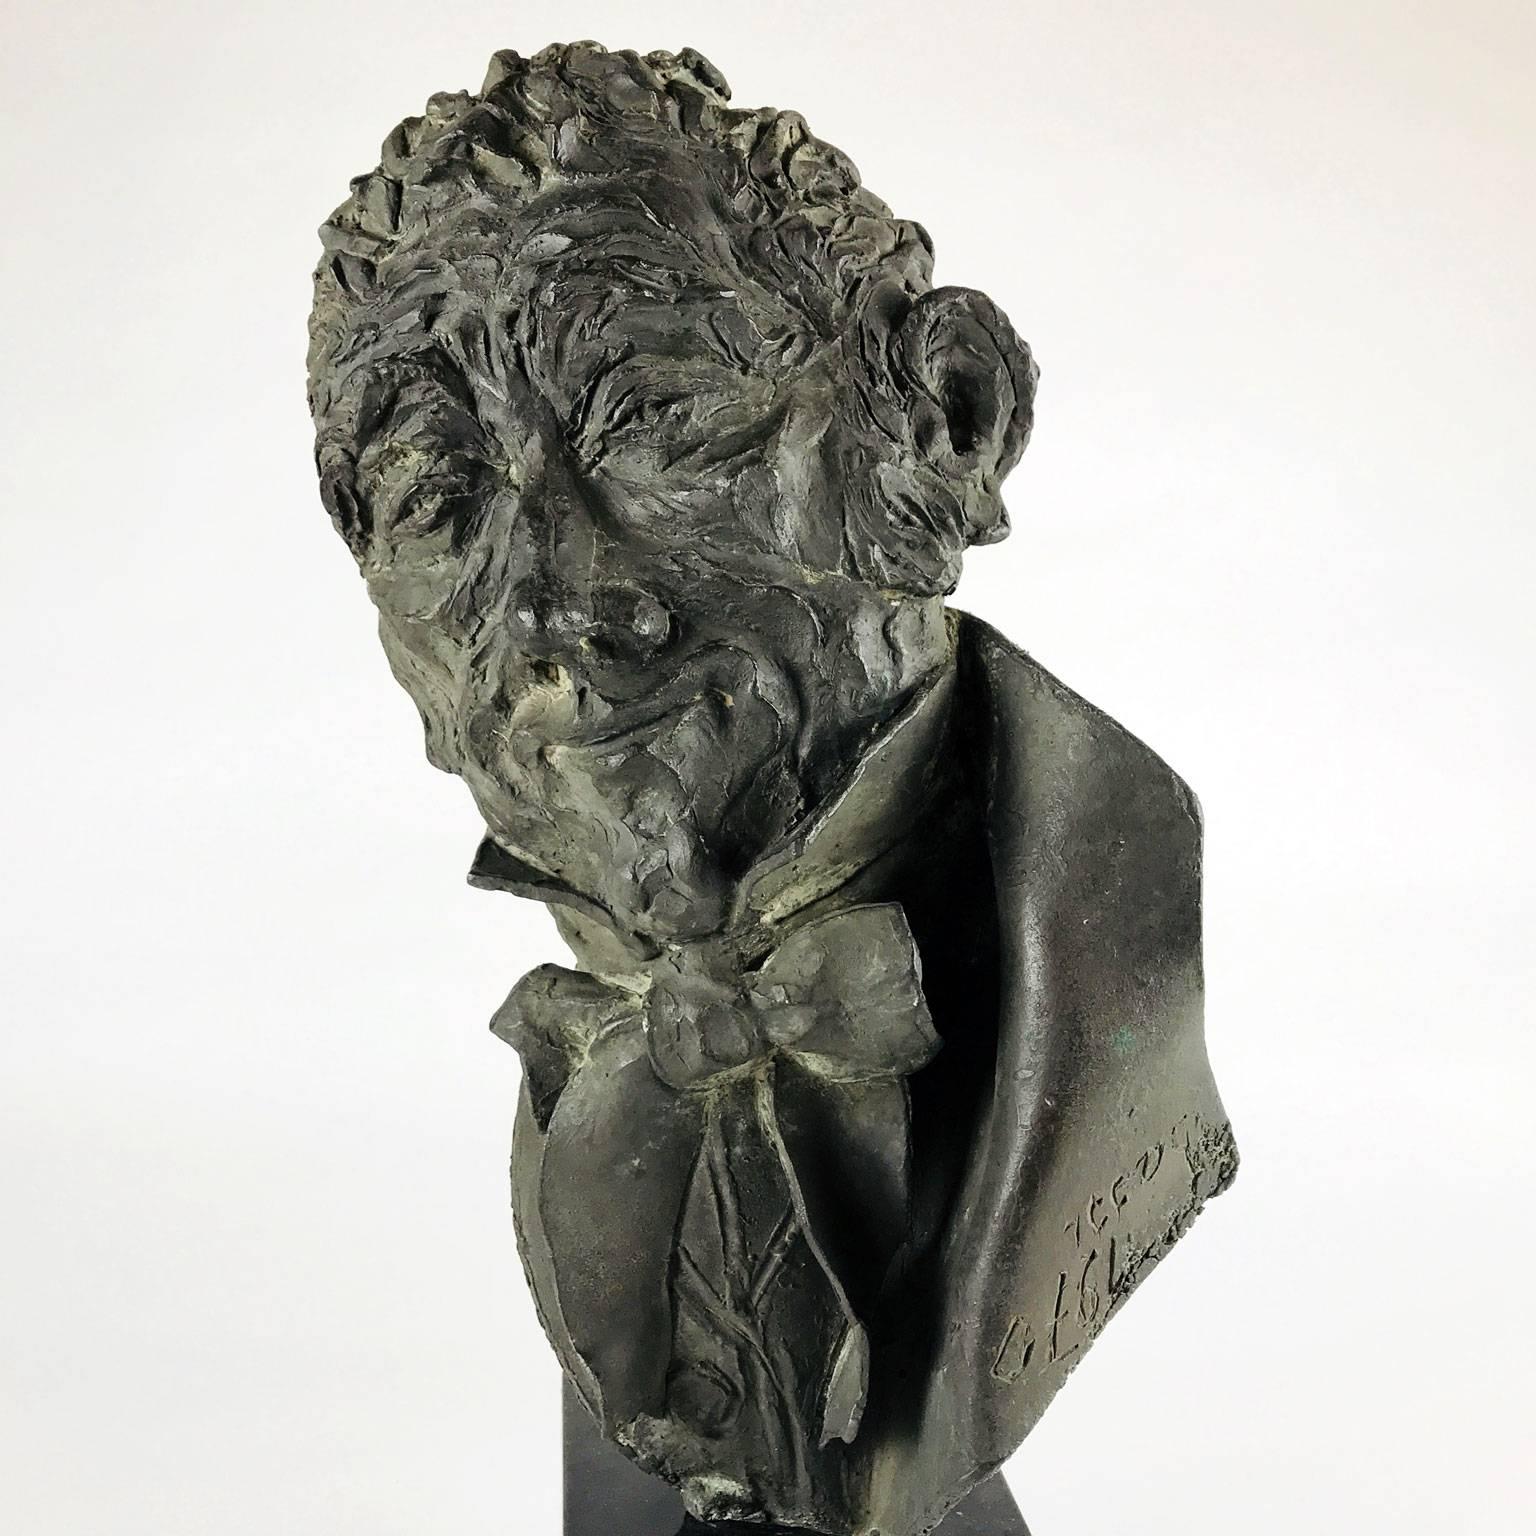 Antique Italian bronze sculpture of a smiling man, probably depicting the artist Alessandro Manzoni, with mocking look wearing a bowtie, signed and dated on the back coat collar Bassi, 1970, by the Italian artist Dora Bassi (1921-2007), a sculptor